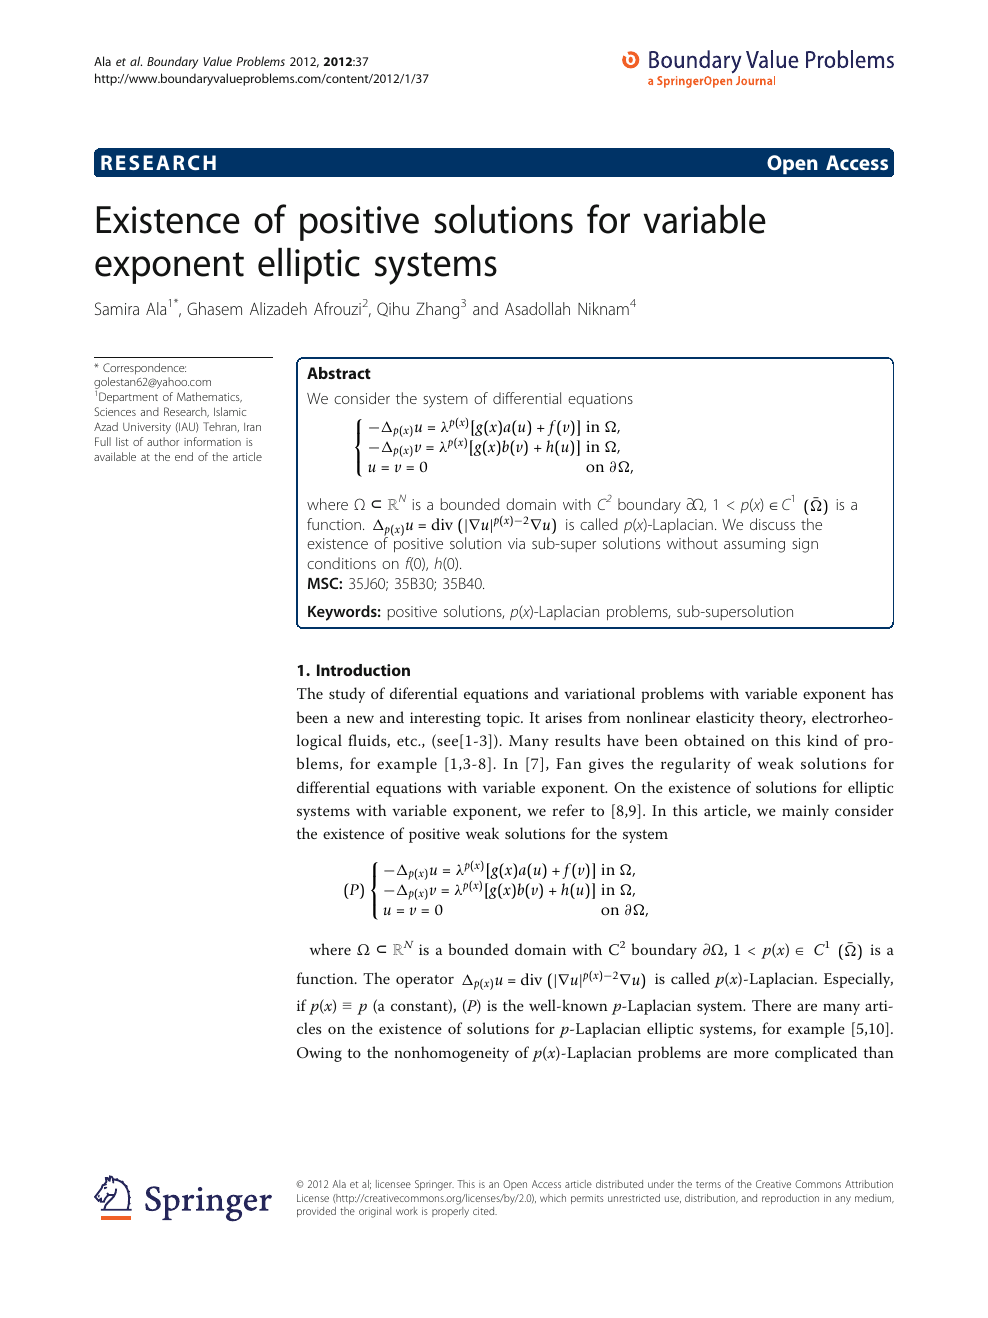 Existence Of Positive Solutions For Variable Exponent Elliptic Systems Topic Of Research Paper In Mathematics Download Scholarly Article Pdf And Read For Free On Cyberleninka Open Science Hub